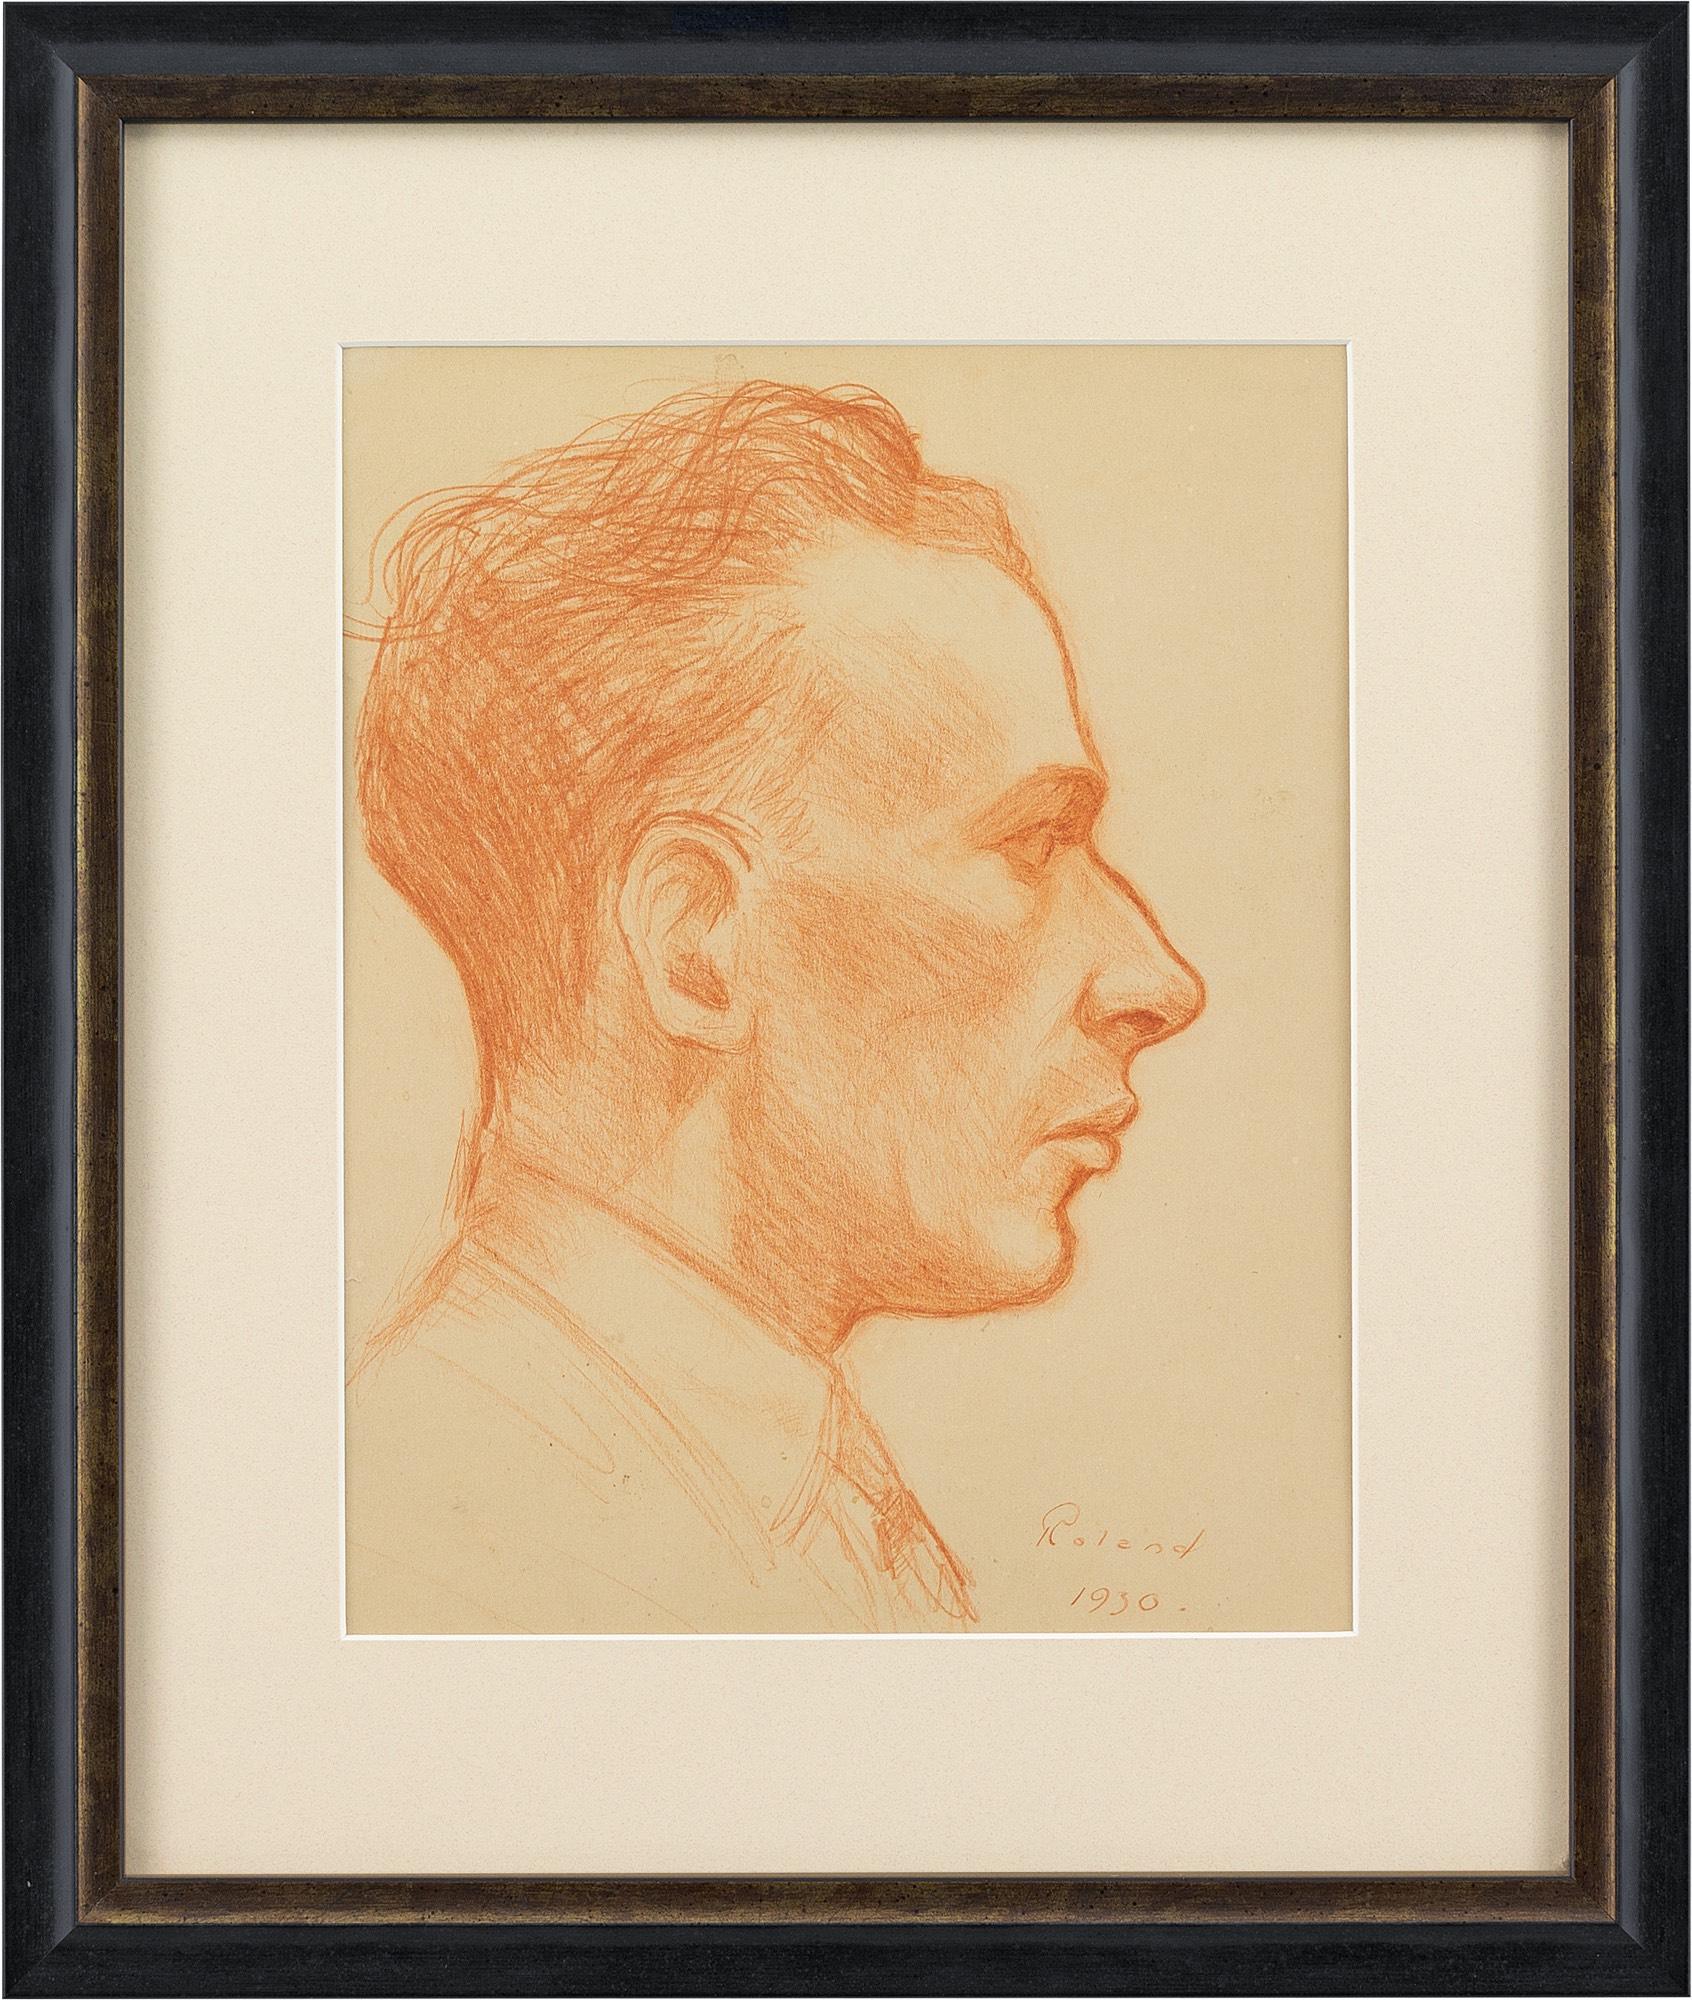 It’s an enigmatic expression, his face in repose with eyes alive and focused. A bold outline describes a striking profile - a strong portrayal in red chalk.

This skilful portrait study by Swedish artist, Roland Svenssen (1910-2003) was created in